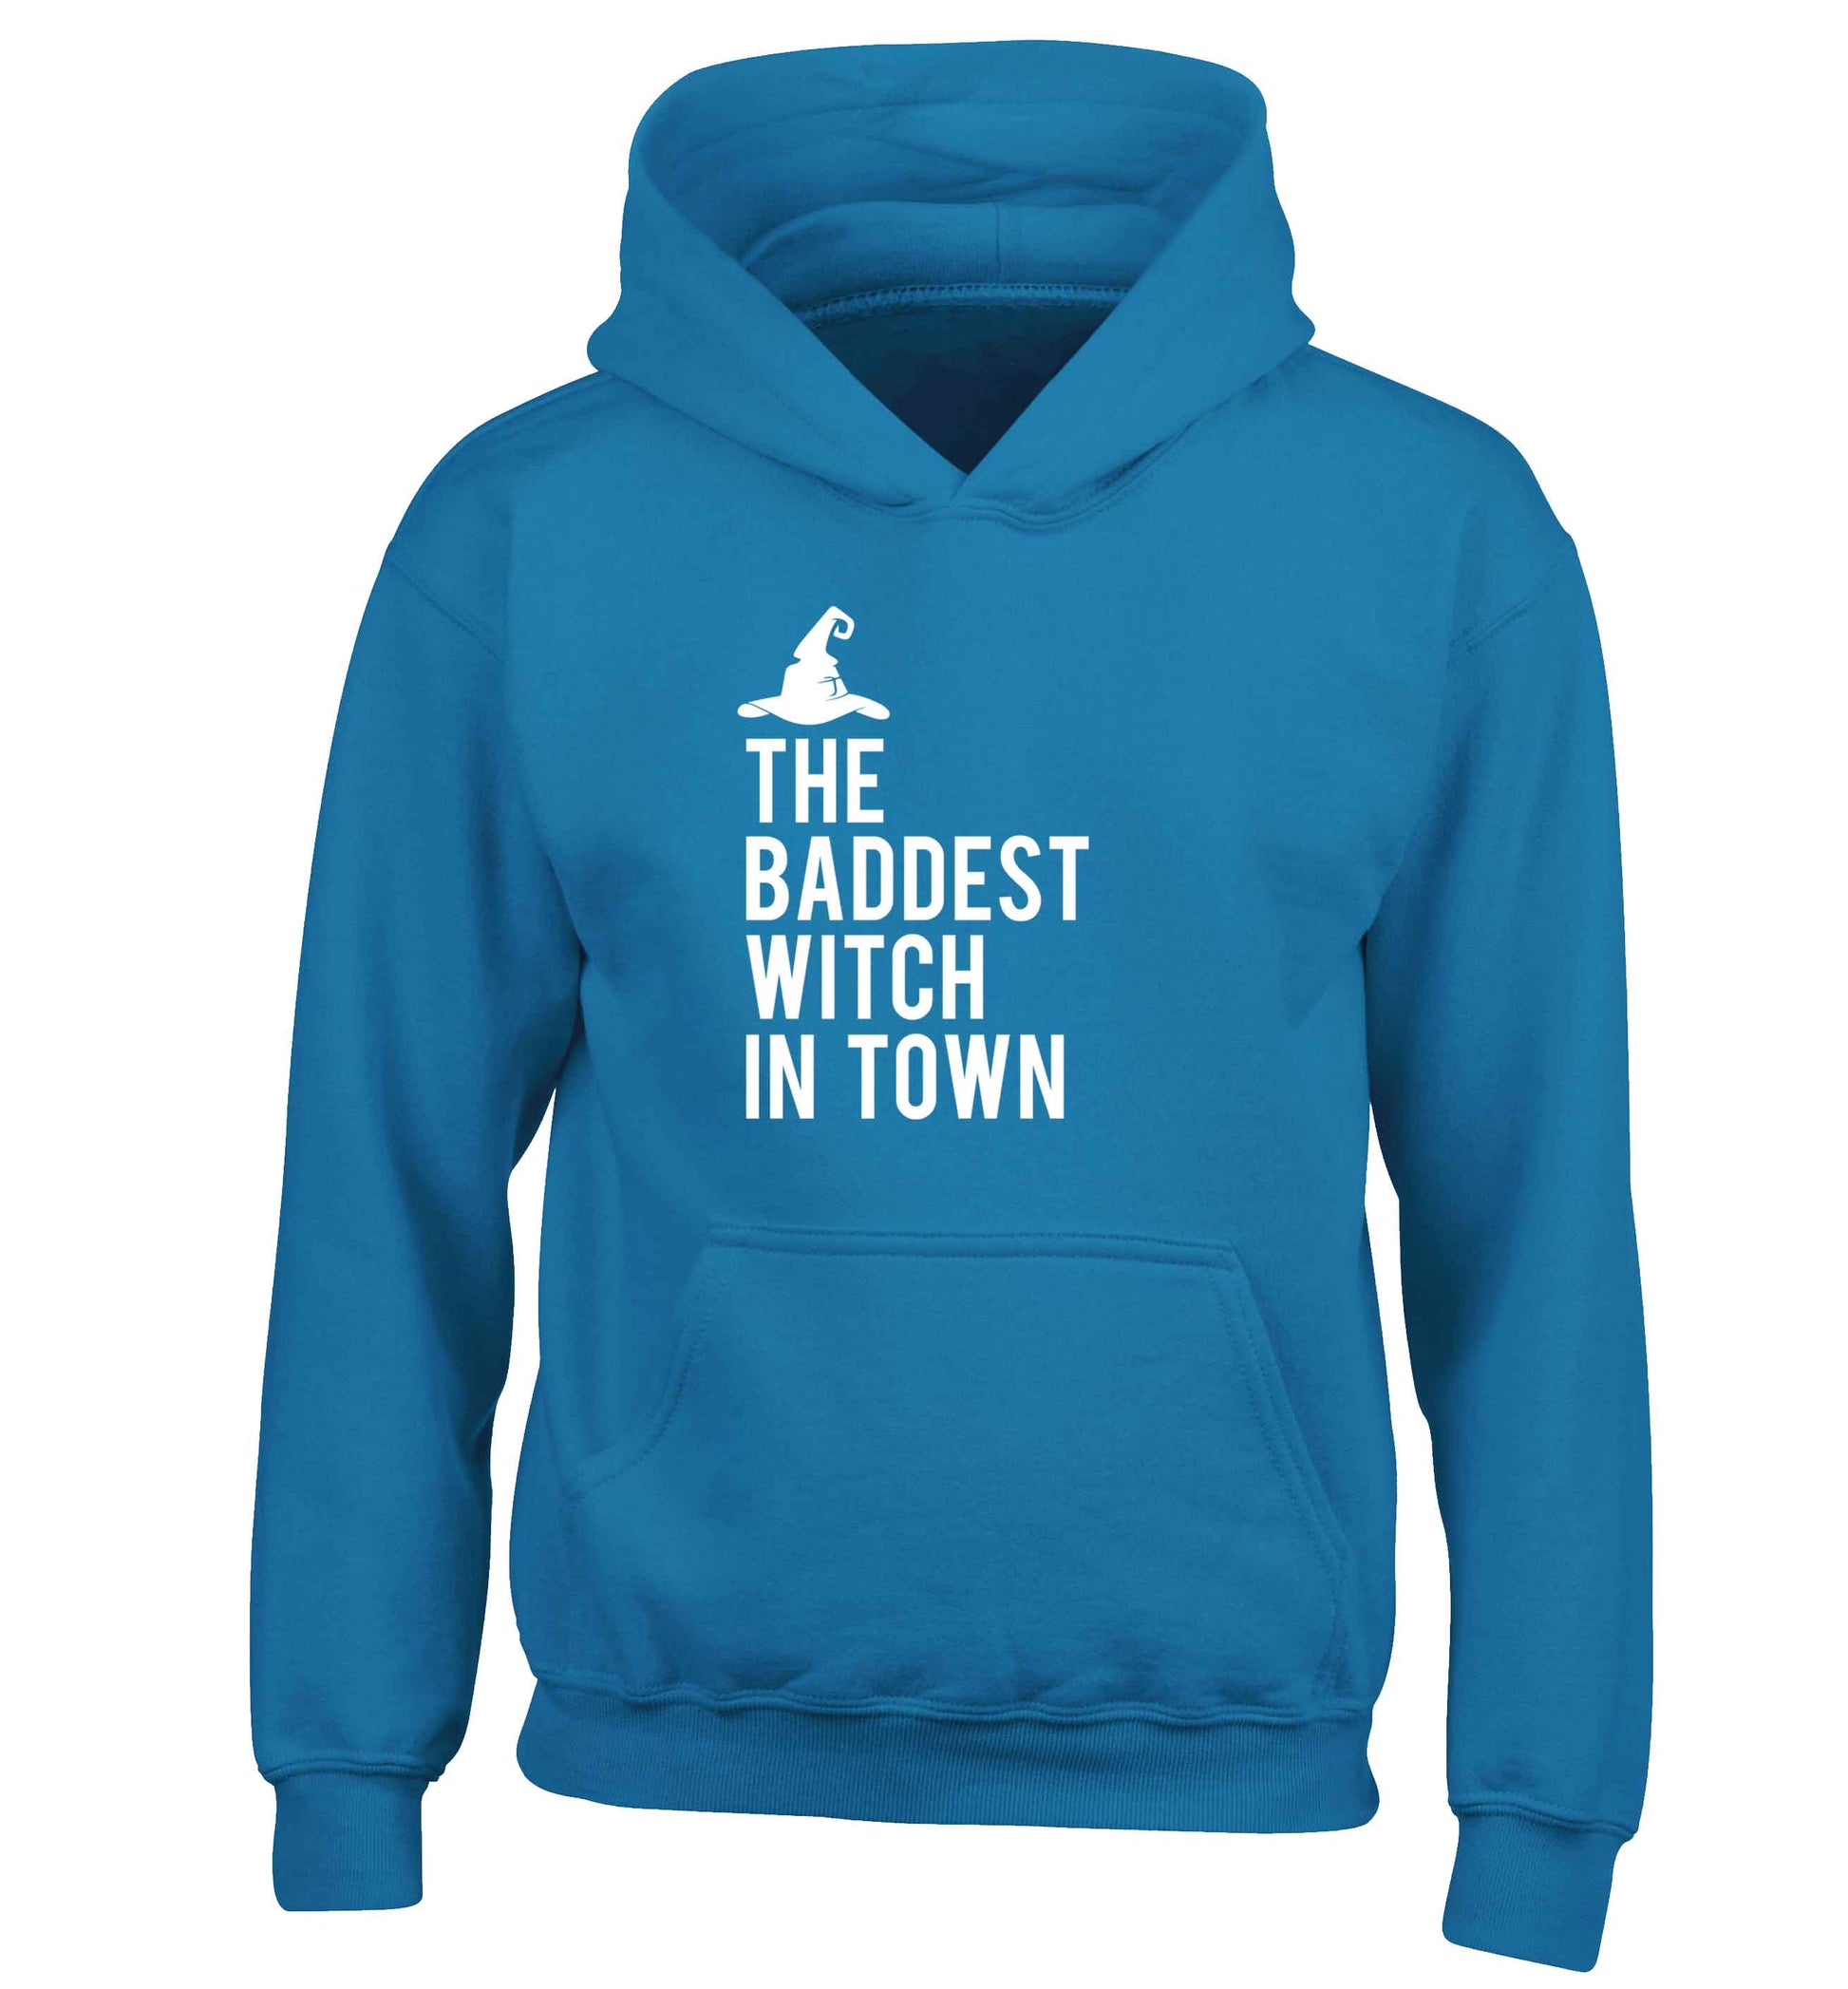 Badest witch in town children's blue hoodie 12-13 Years